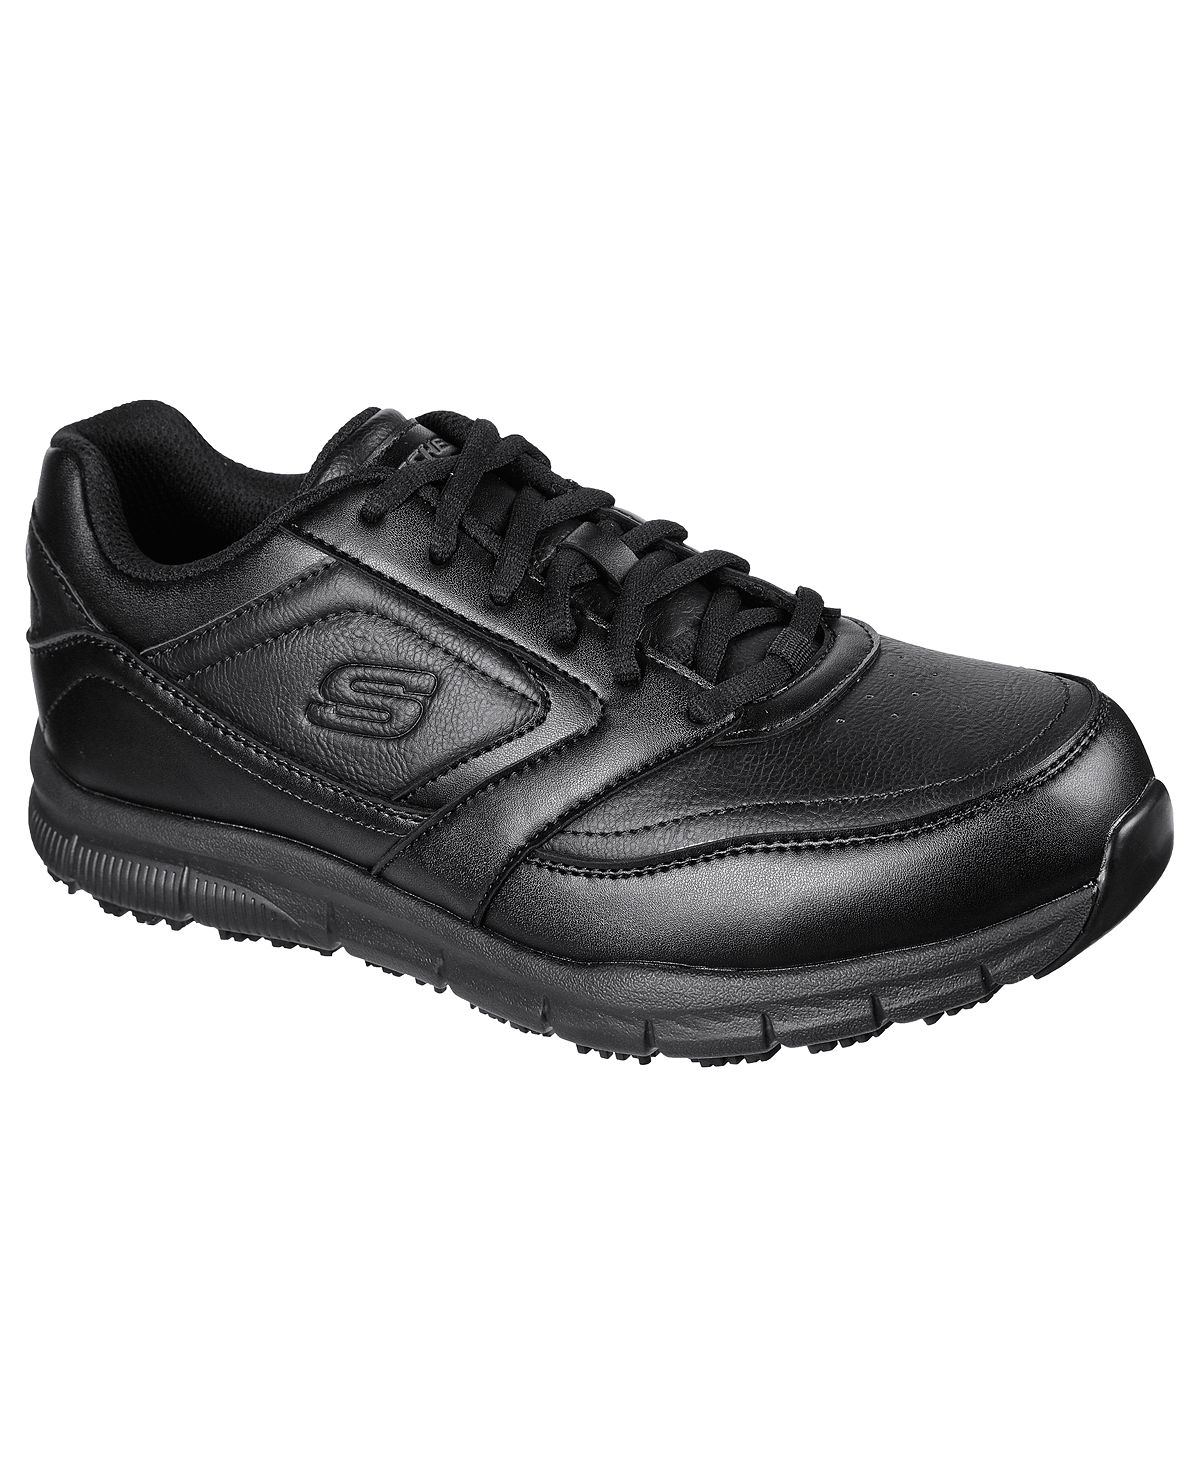 Кроссовки Skechers Men's Work Relaxed Fit Nampa Slip Resistant Work Casual From Finish Line, черный